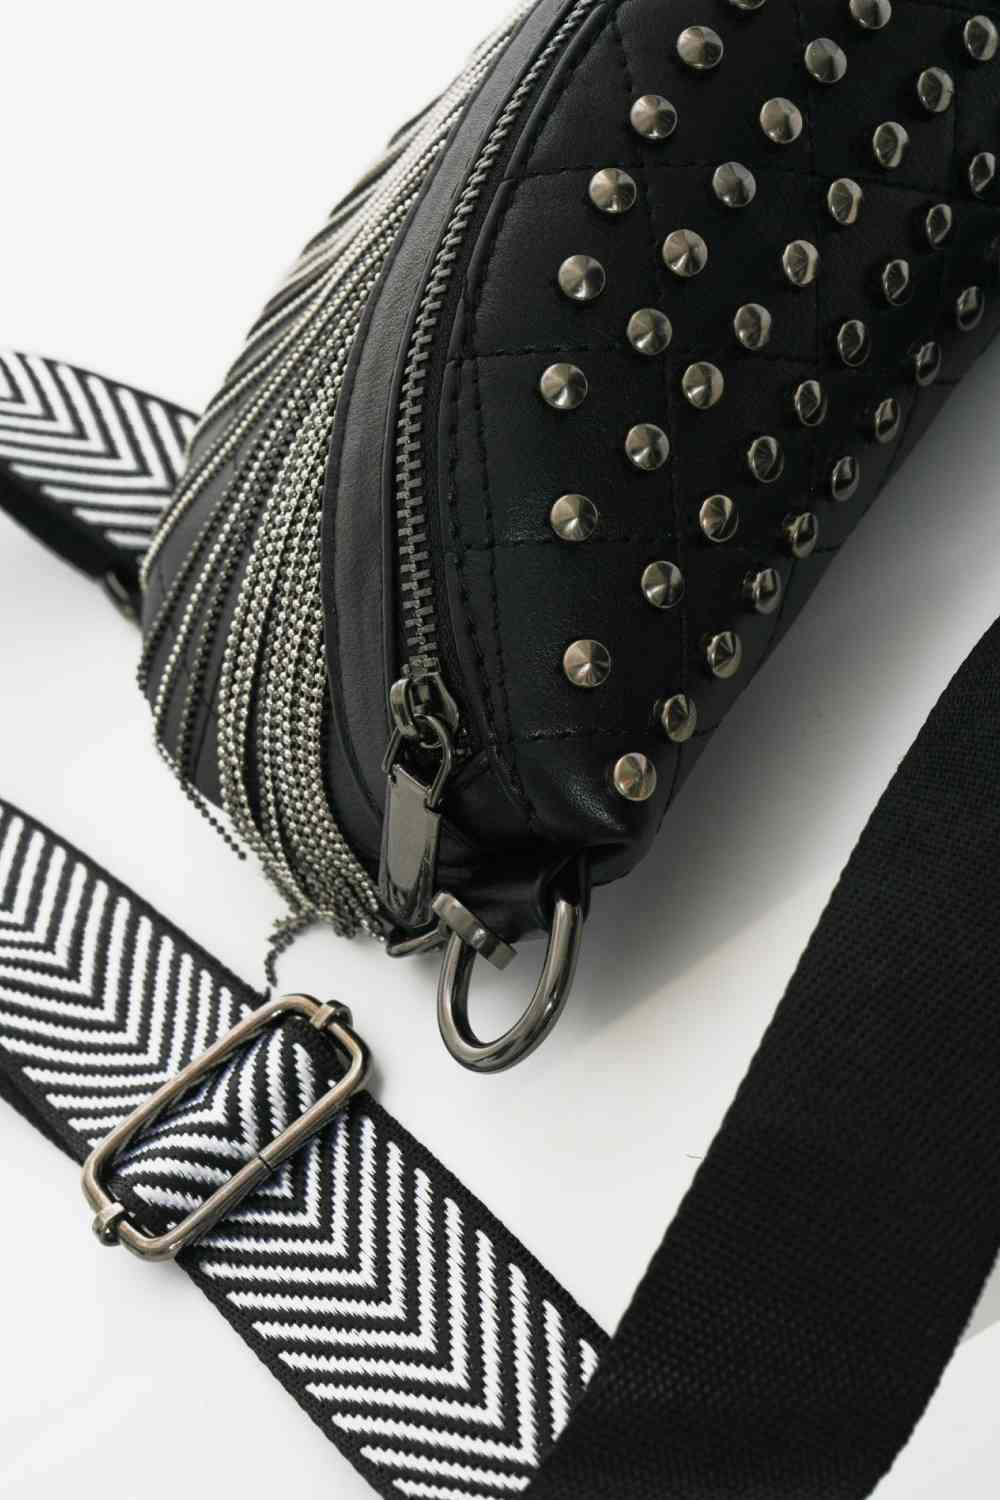 PREORDER: Ria Faux Leather Studded Sling Bag with Fringe